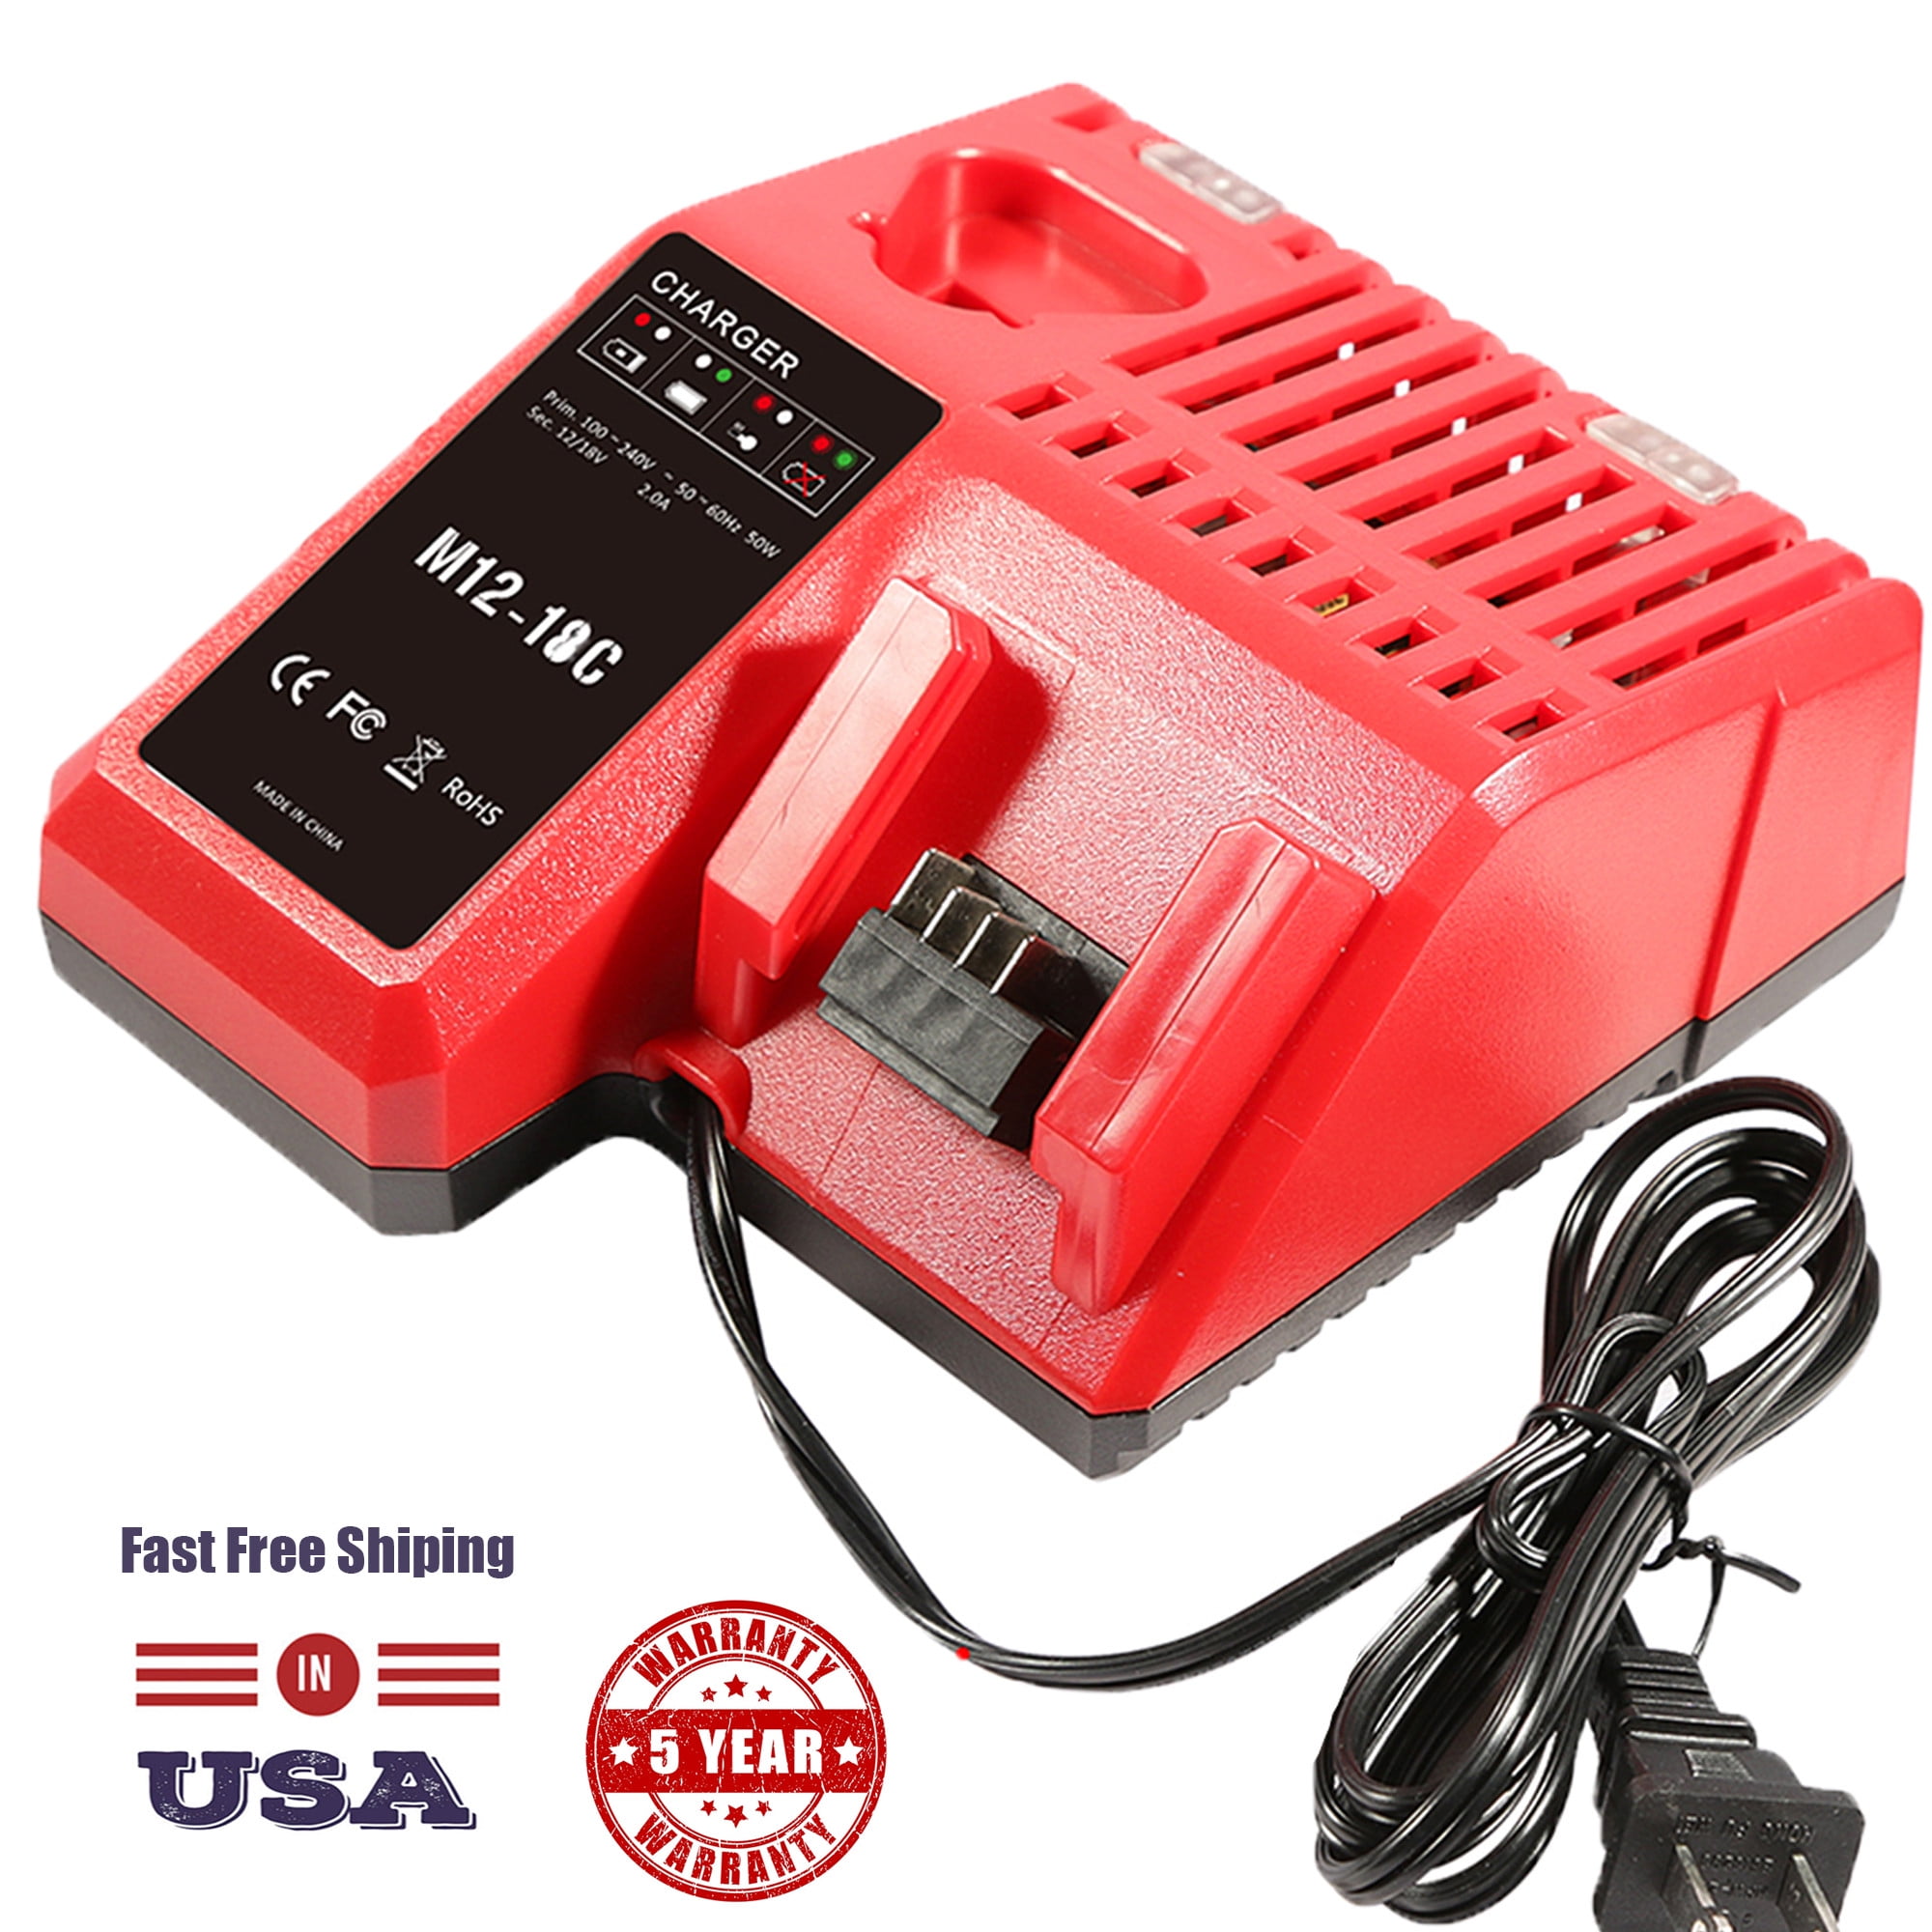 Details about   12-18V Rapid Charger for Milwaukee M12 M18 M12-18C  48-11-1850 Li-ion Battery US 